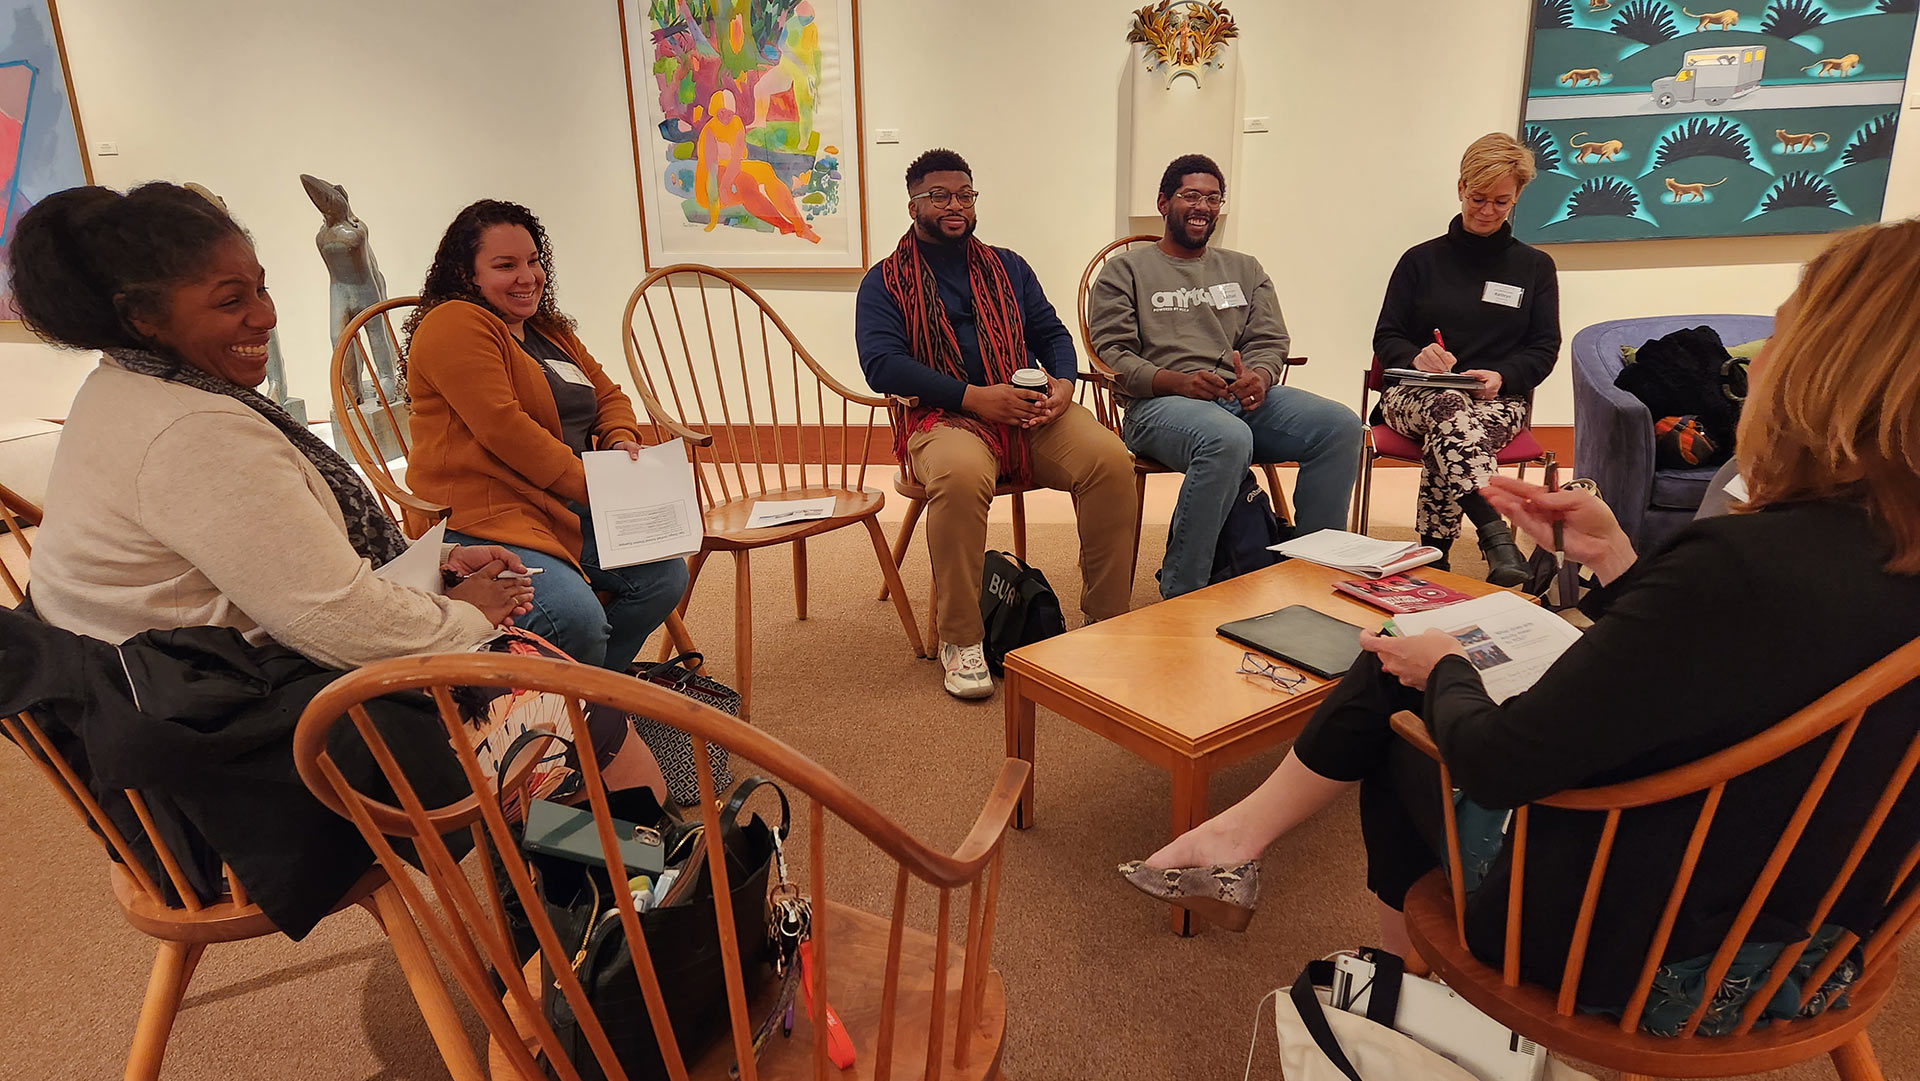 A breakout workshop in the Guilford College Art Gallery discussing Art Education.